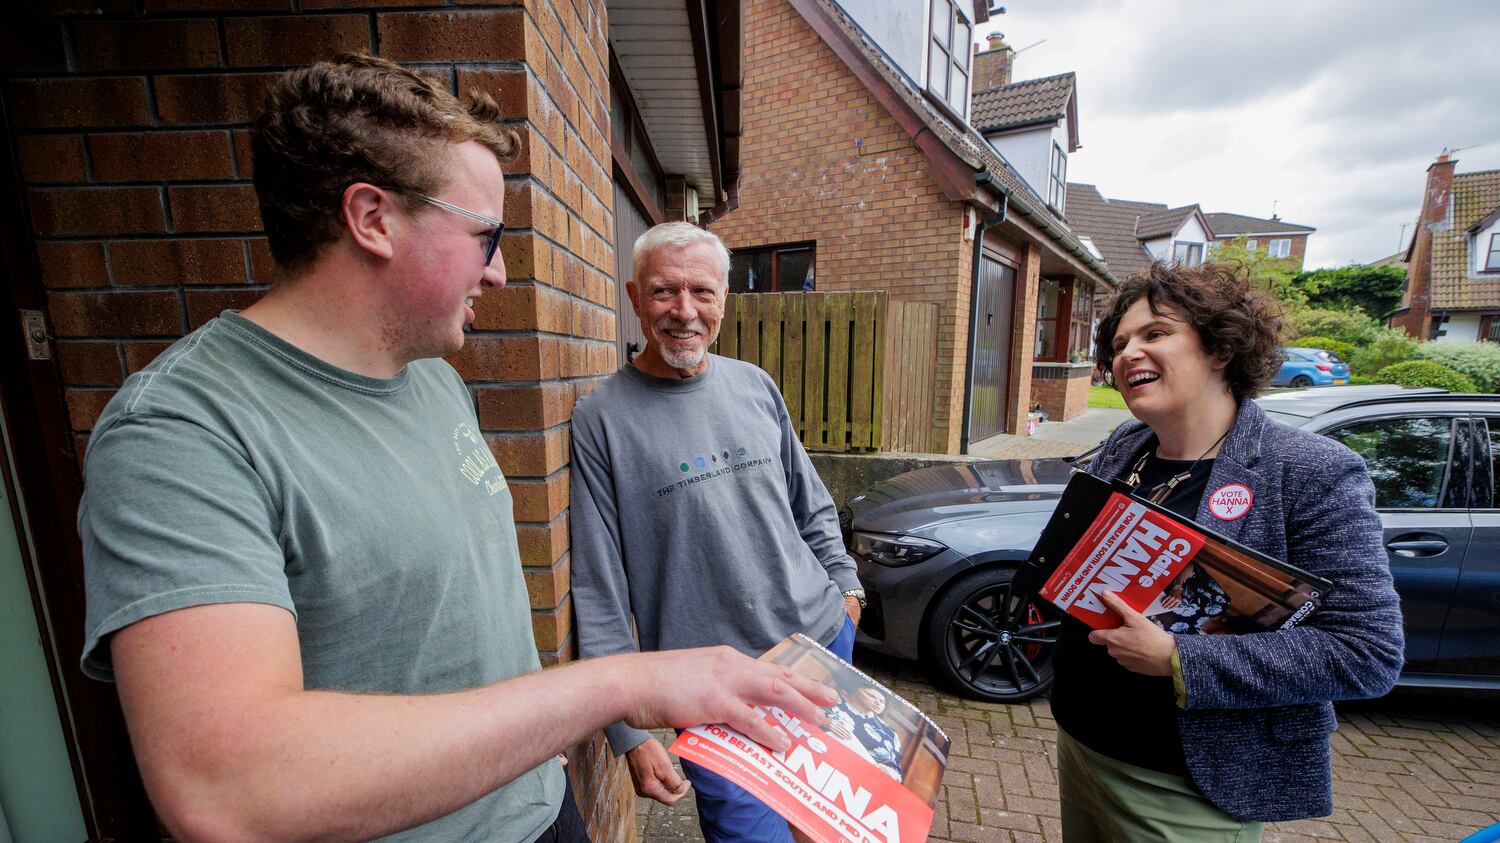 Claire Hanna (right), SDLP Westminster candidate for the constituency of South Belfast and Mid Down in Northern Ireland, speaking with Jimmy Wilkinson and his father Ian, while canvassing in Carryduff